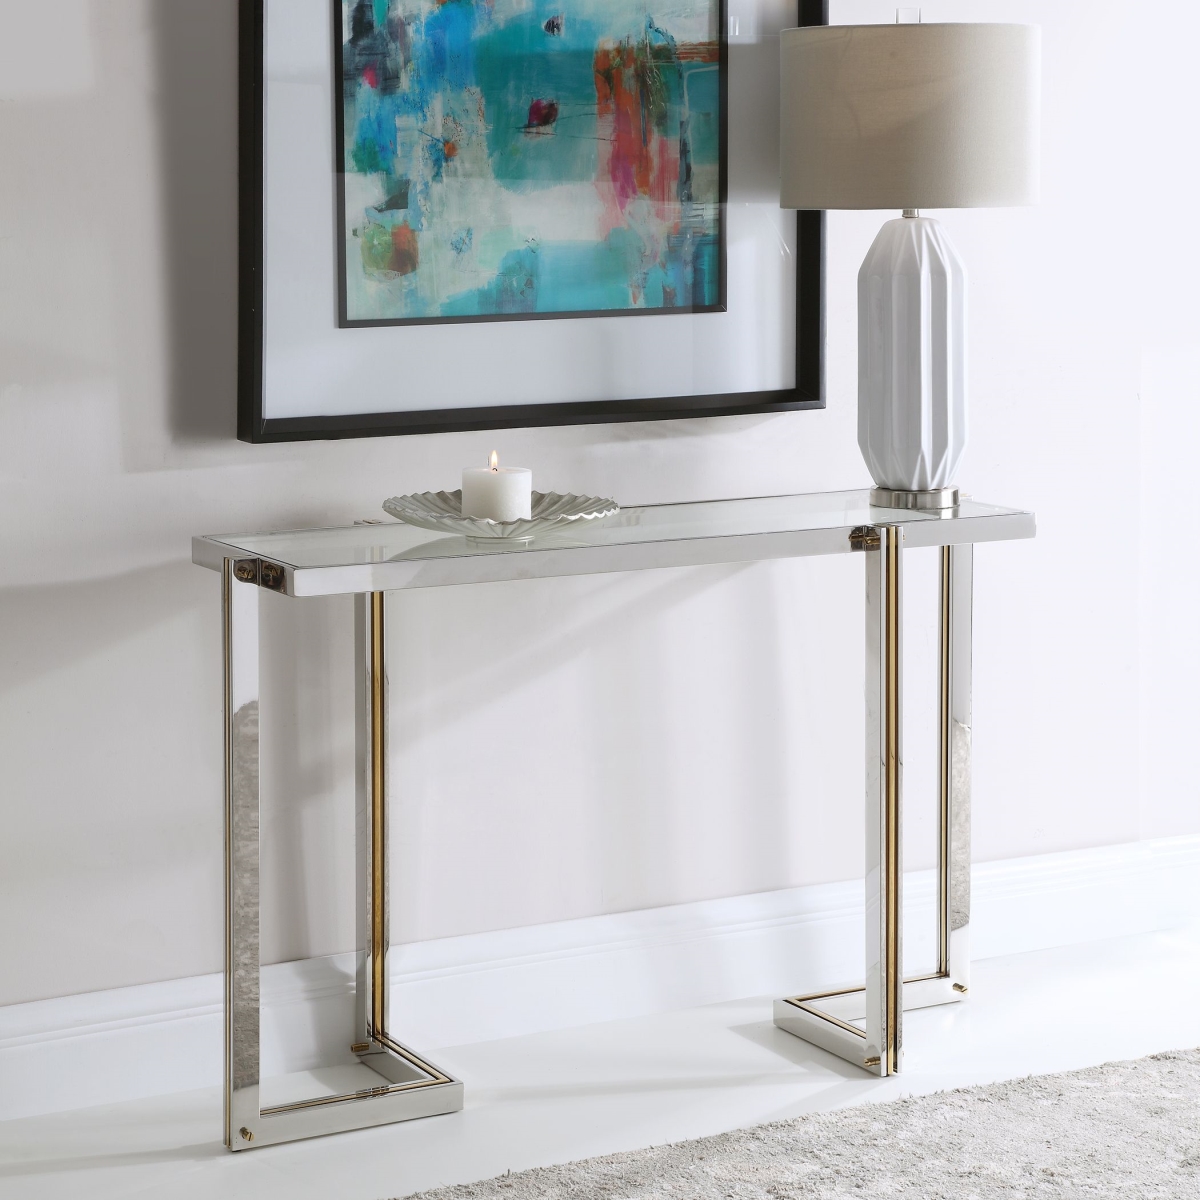 Picture of 212 Main 24937 24 x 40 x 58 in. Locke Modern Console Table